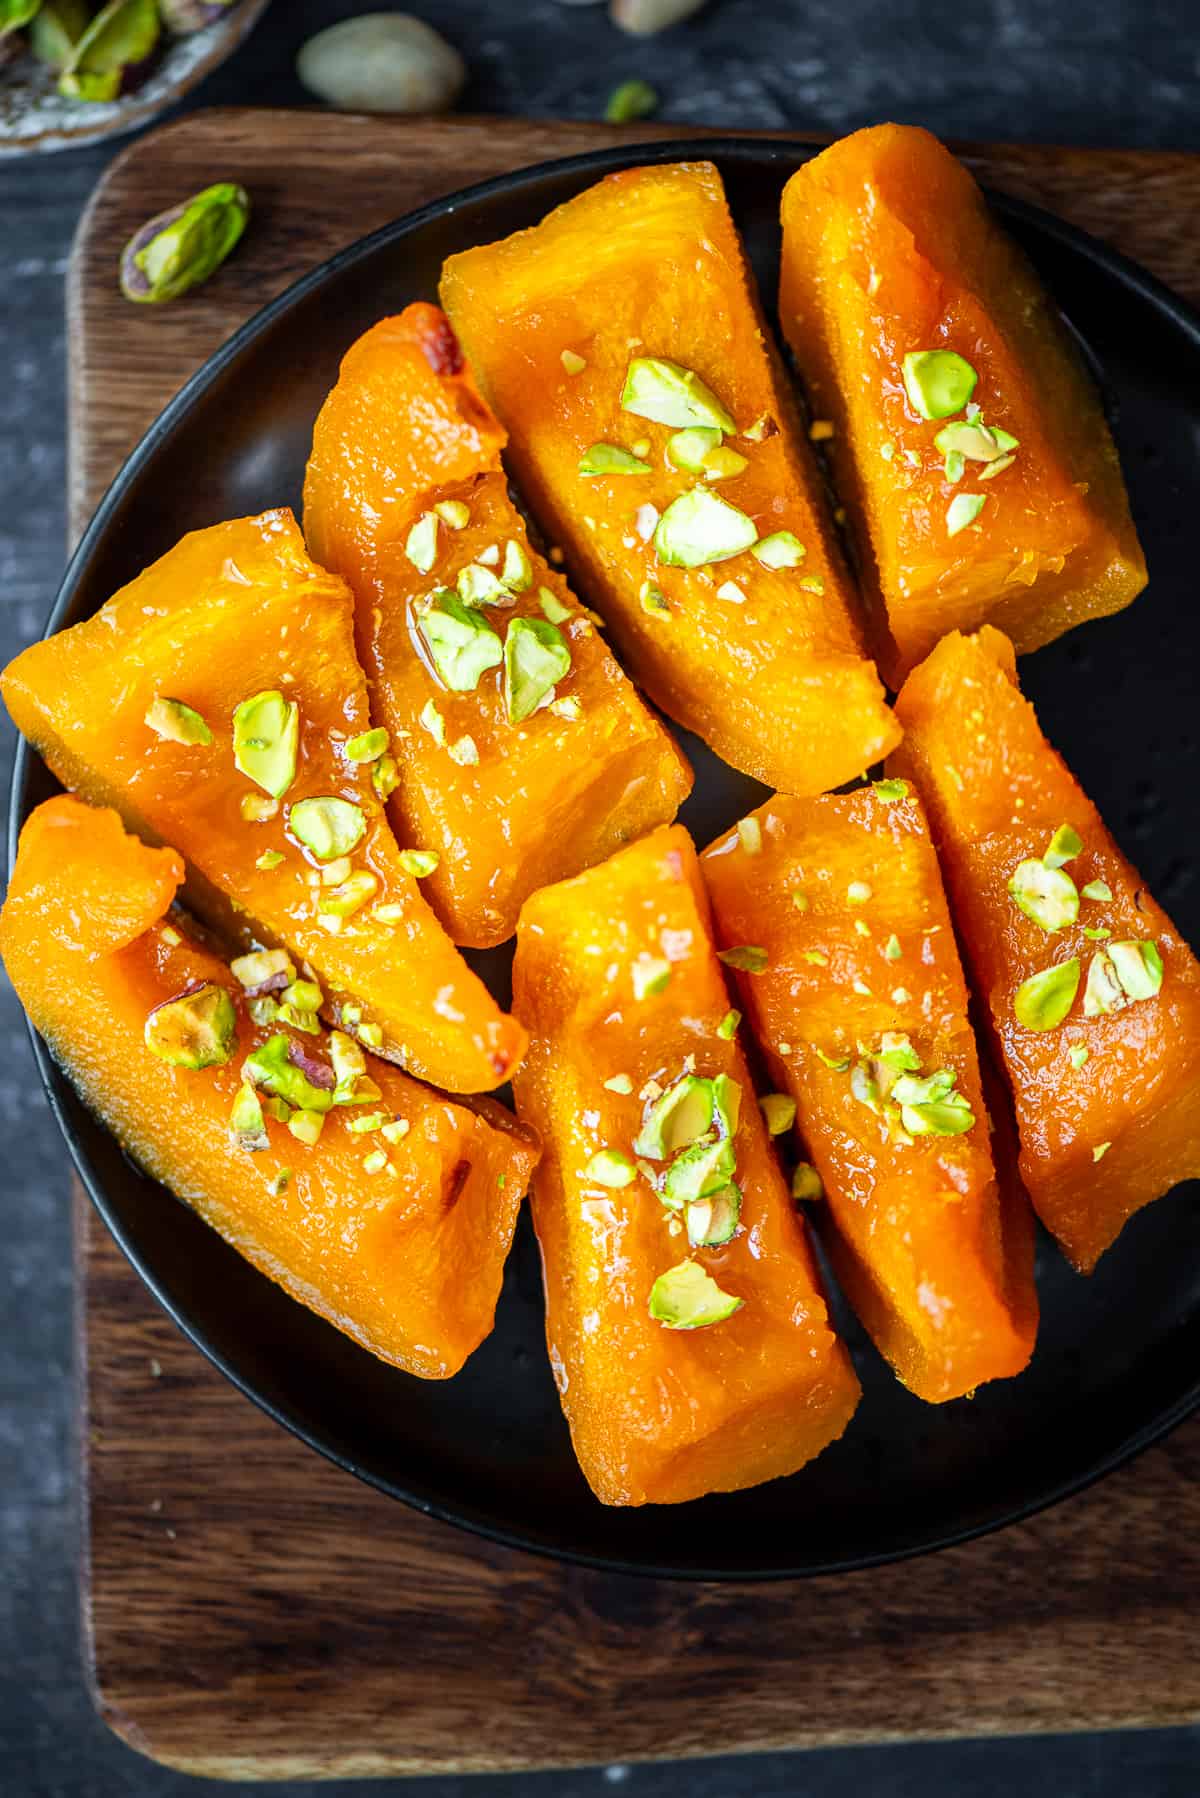 Pumpkin dessert slices garnished with chopped pistachios on a black plate.